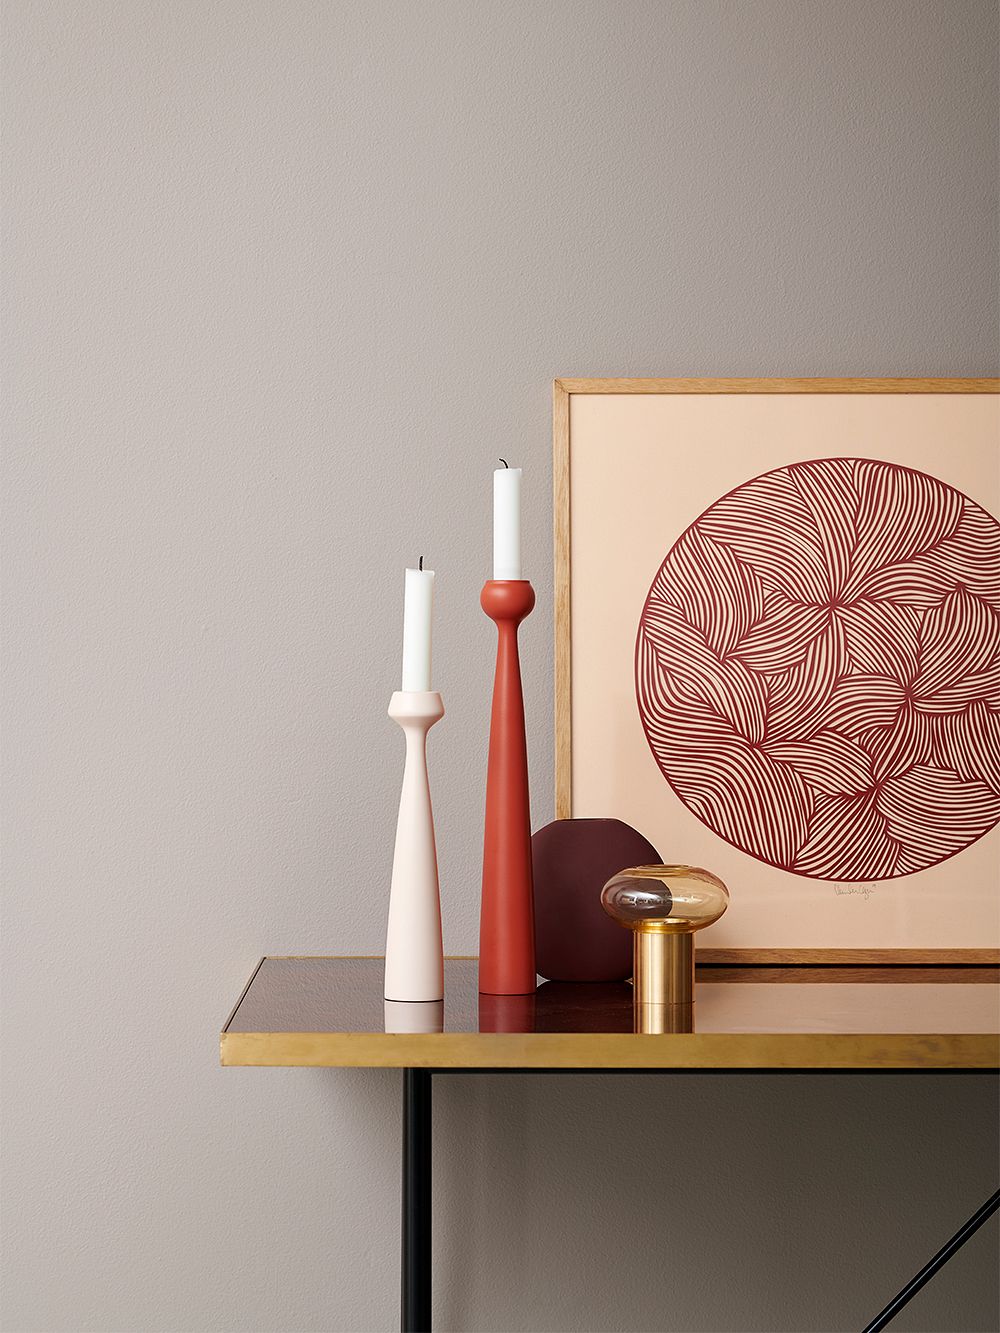 An image of applicata's Blossom candleholders in a light pink and a coral red hue, as part of the living room decor.